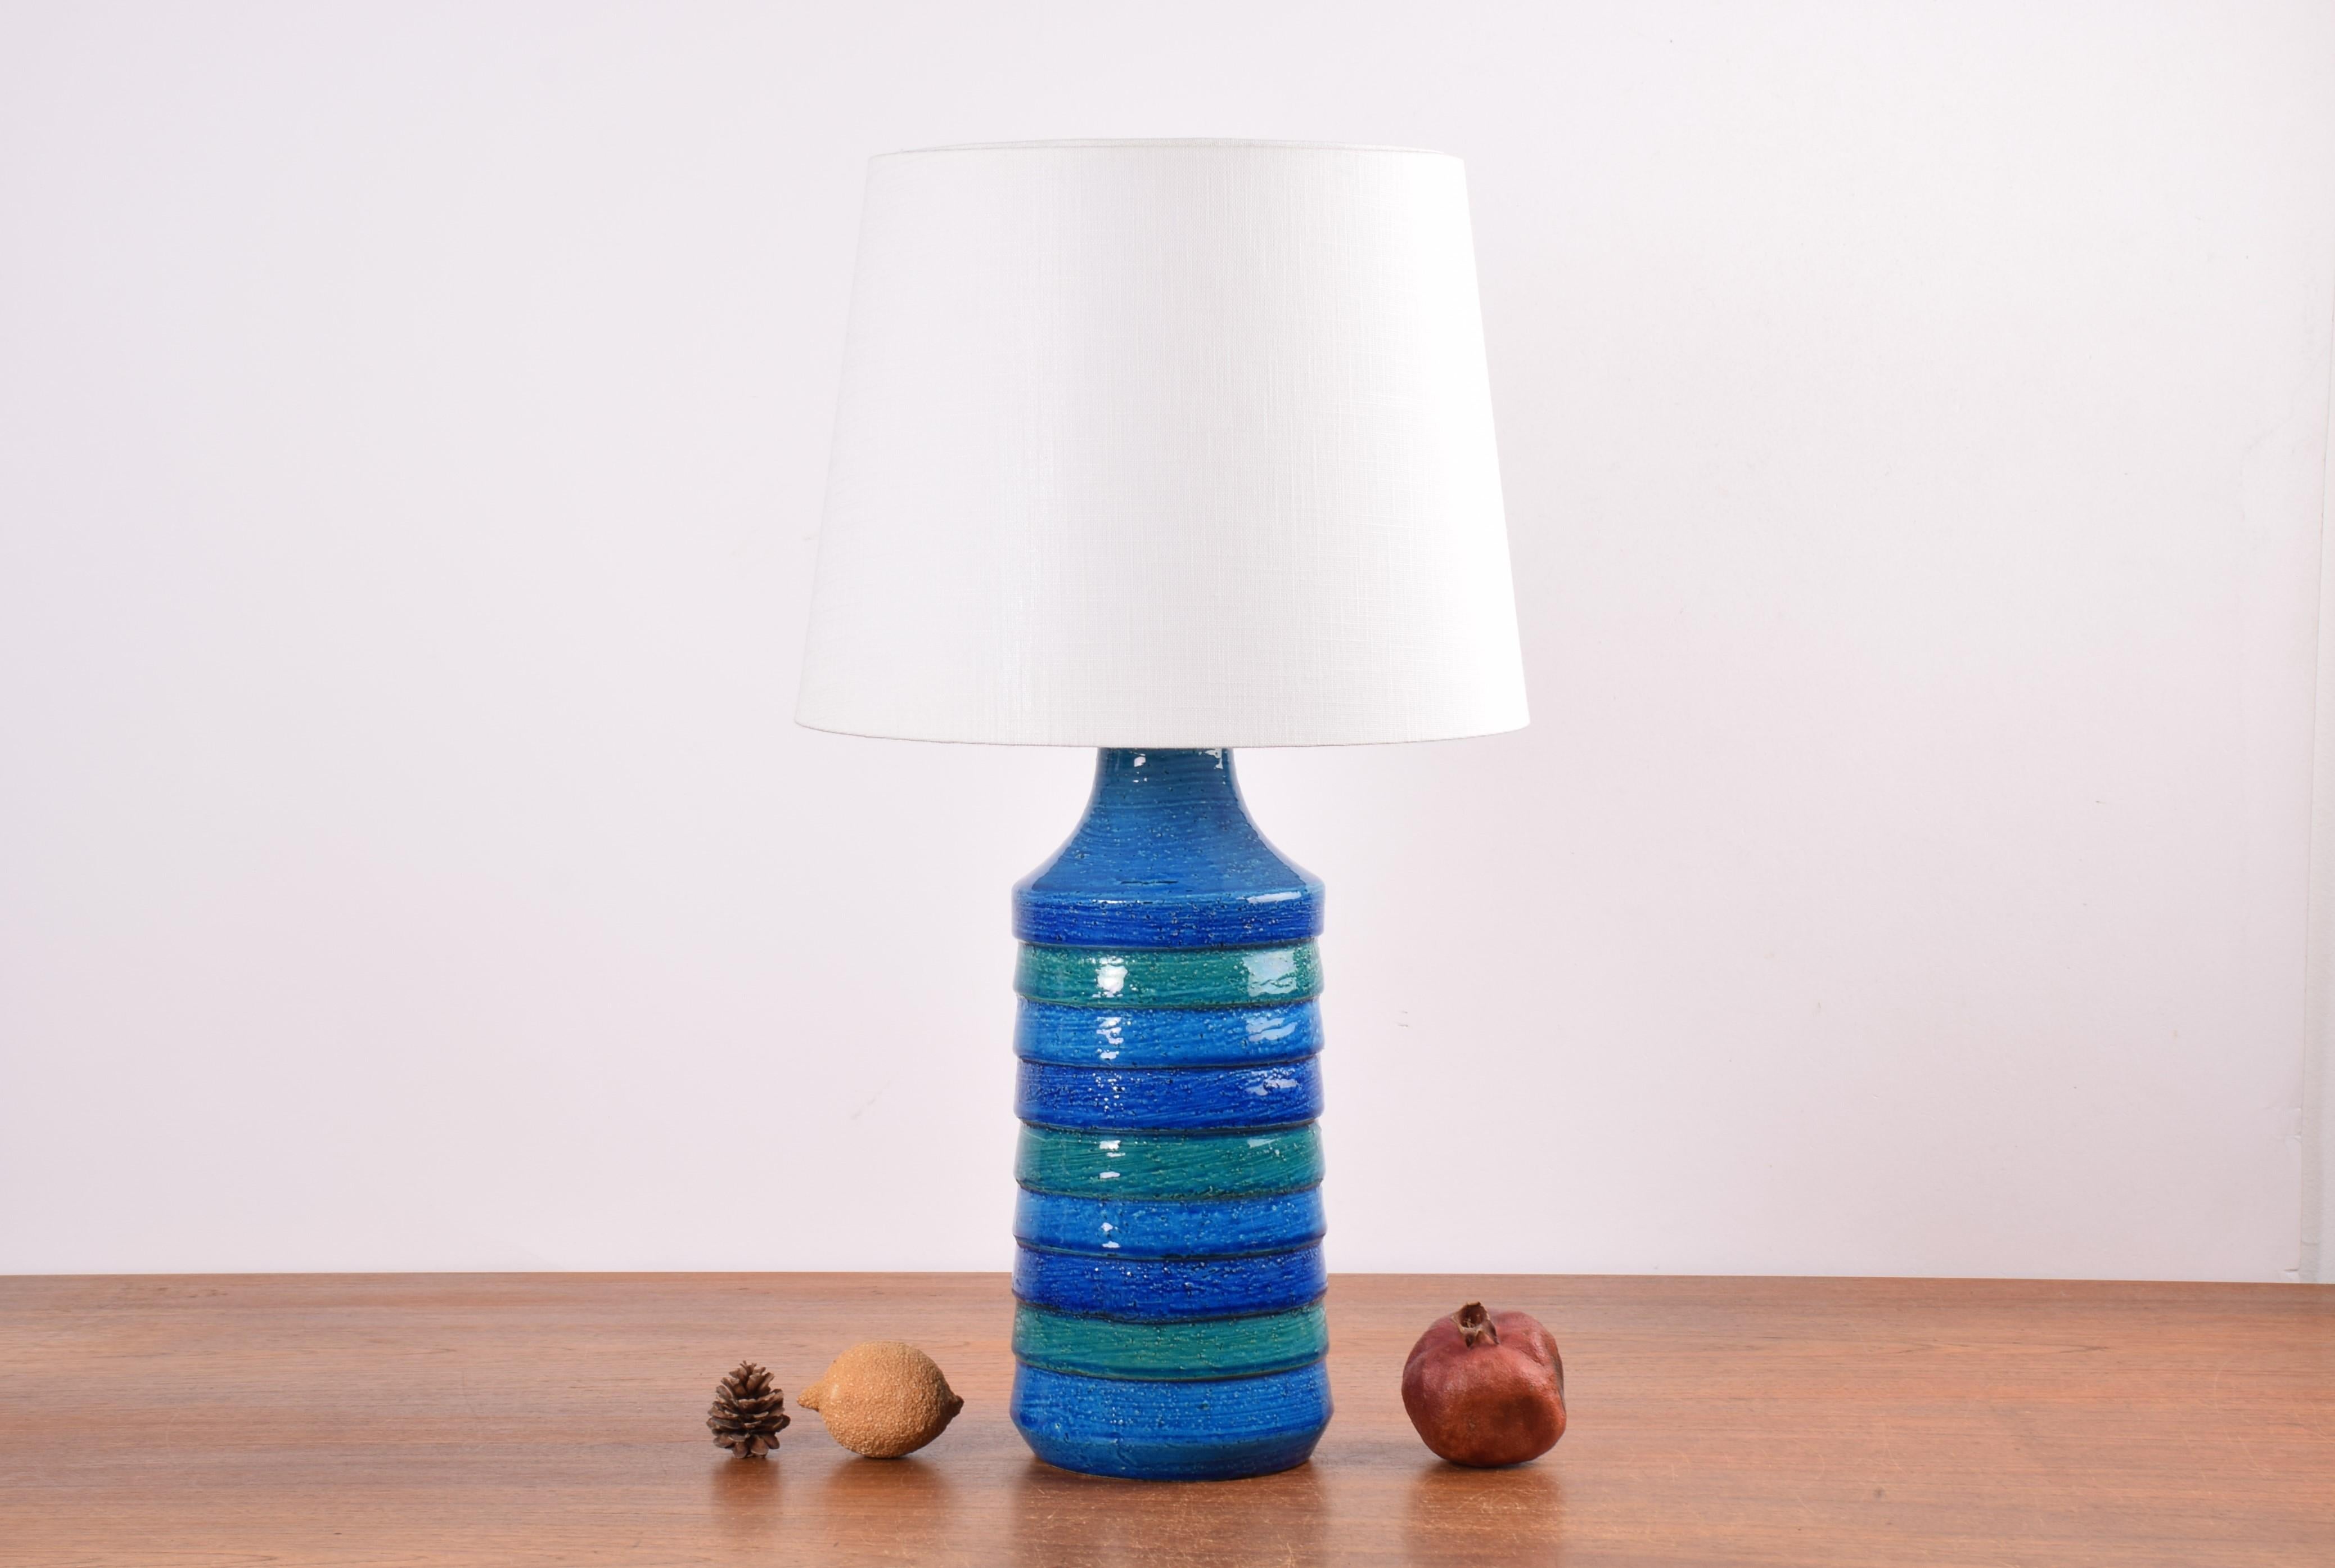 Midcentury Italian ceramic table lamp by Aldo Londi for Bitossi. Made circa 1960s.

Bright stripe decor in different shades of blue.

Wears original papersticker on inside bottom with text: Made in Italy M 10 / 30

Included is a new lampshade